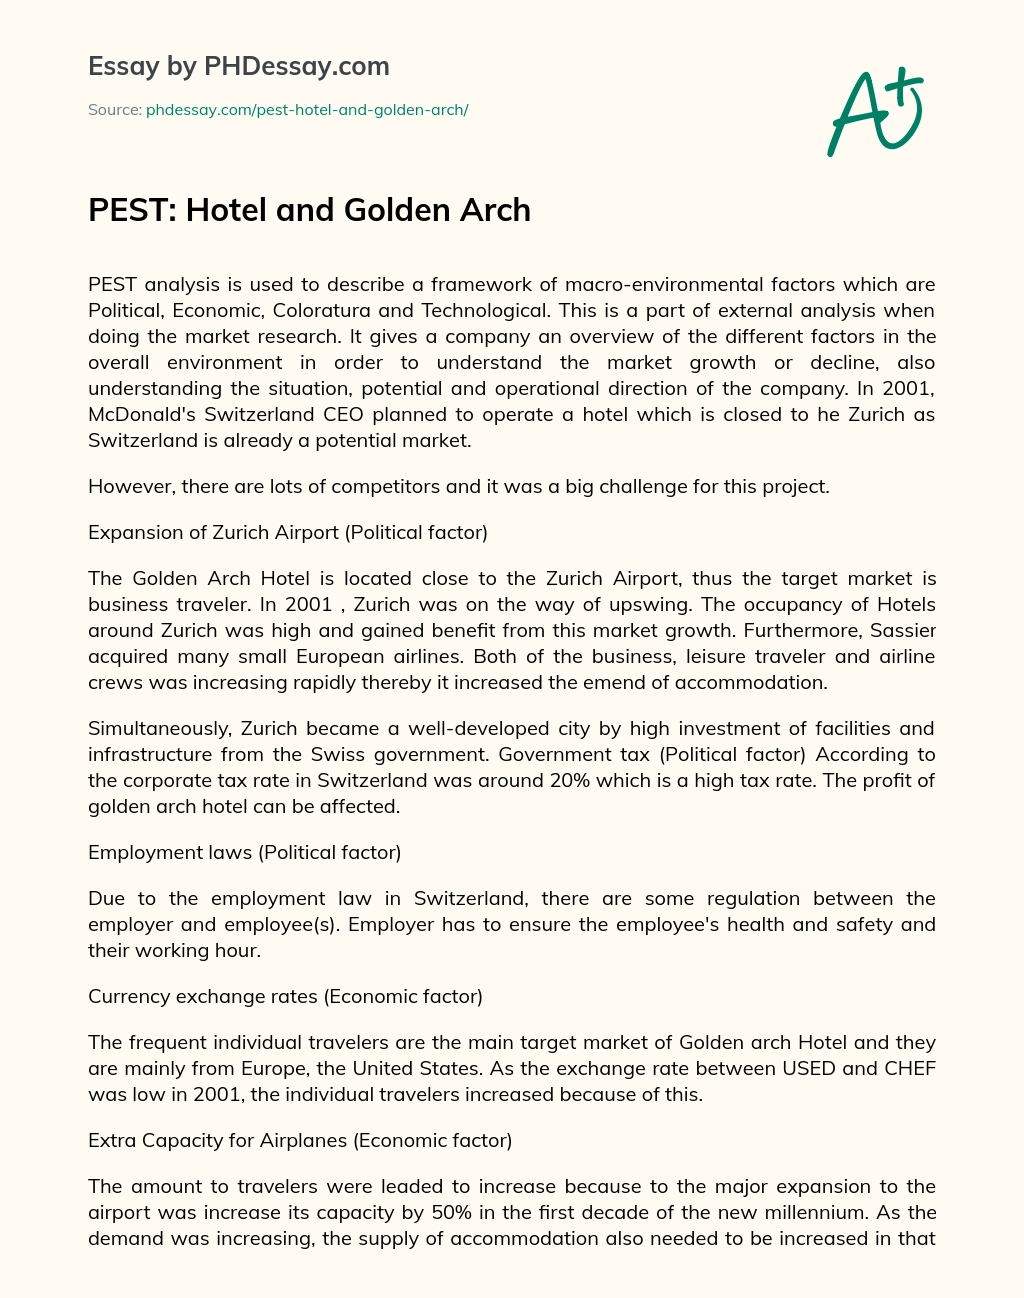 PEST: Hotel and Golden Arch essay